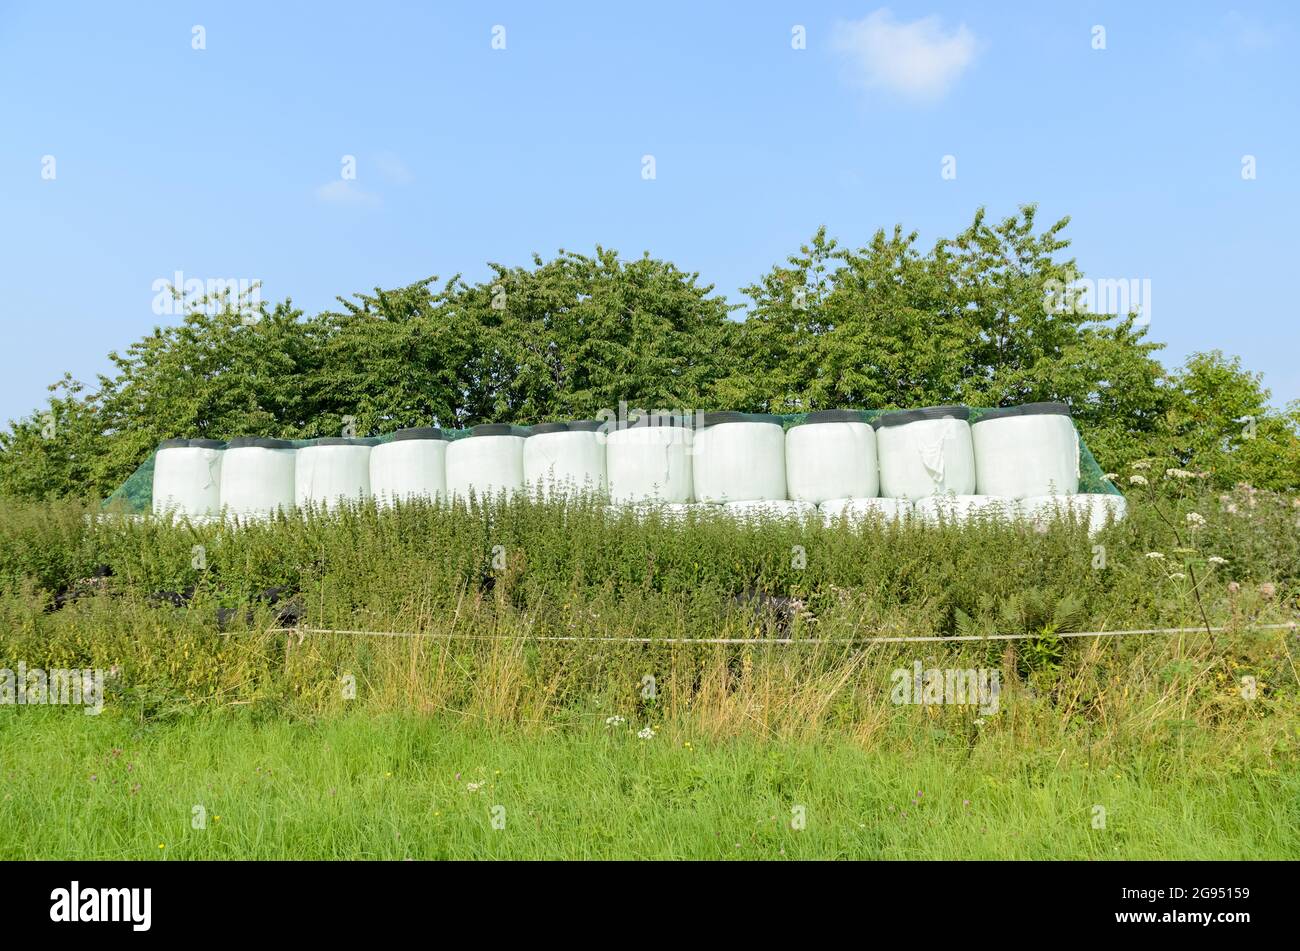 Pile of hay bales for fooder wrapped in plastic, covered with a net and discarded old rubber tires near a farm in the rural countryside in Germany Stock Photo